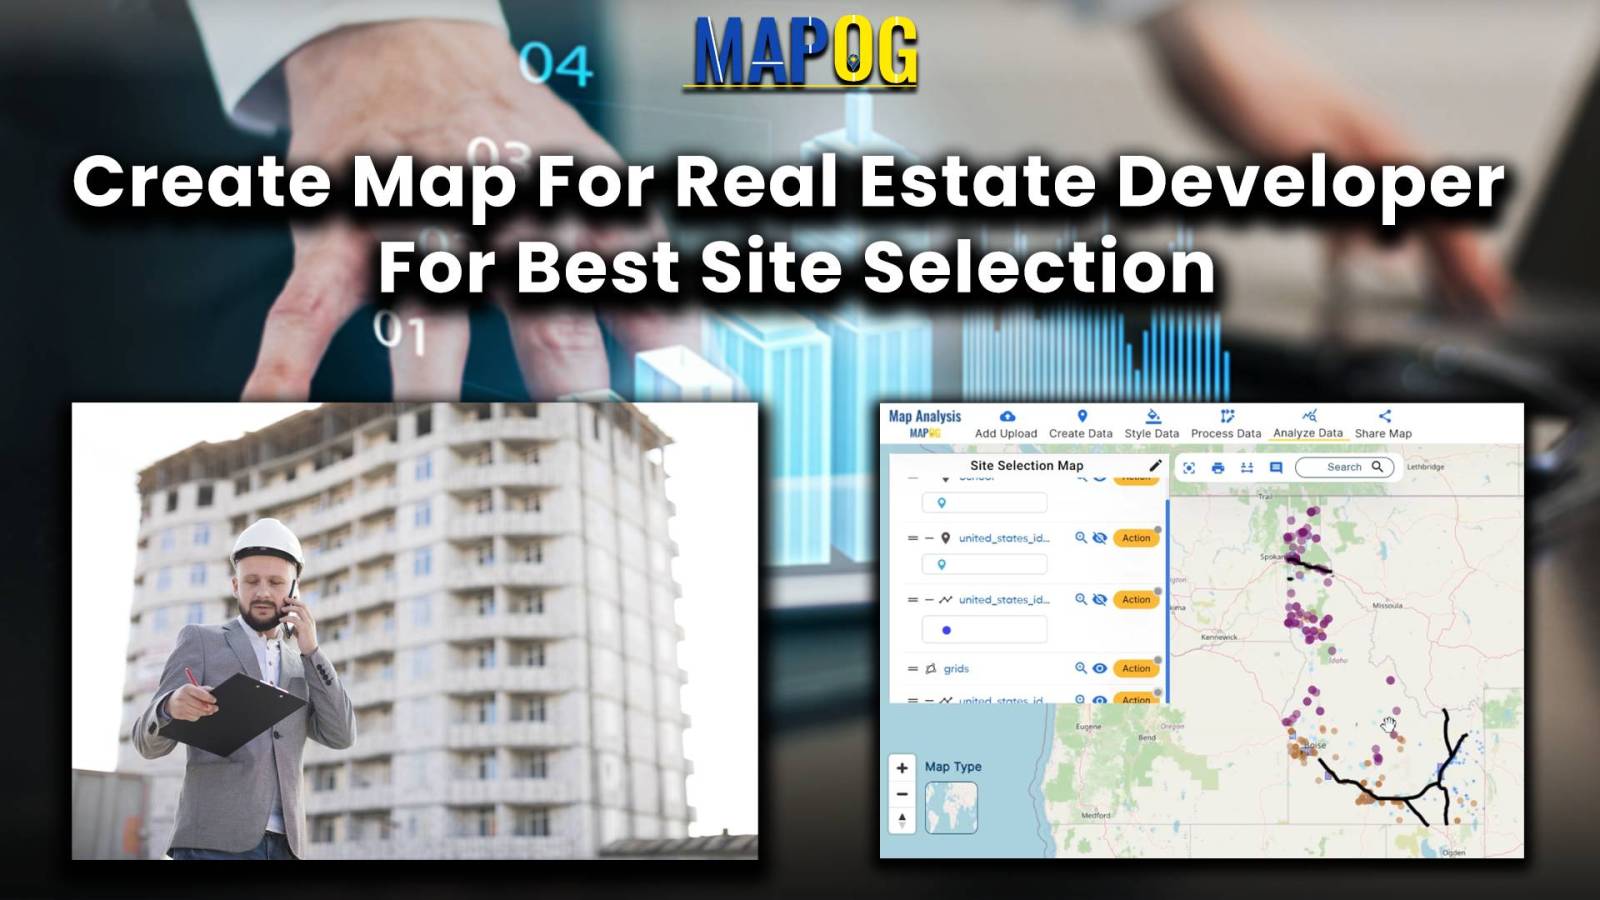 Create Map for Real Estate Developer for Best Site Selection